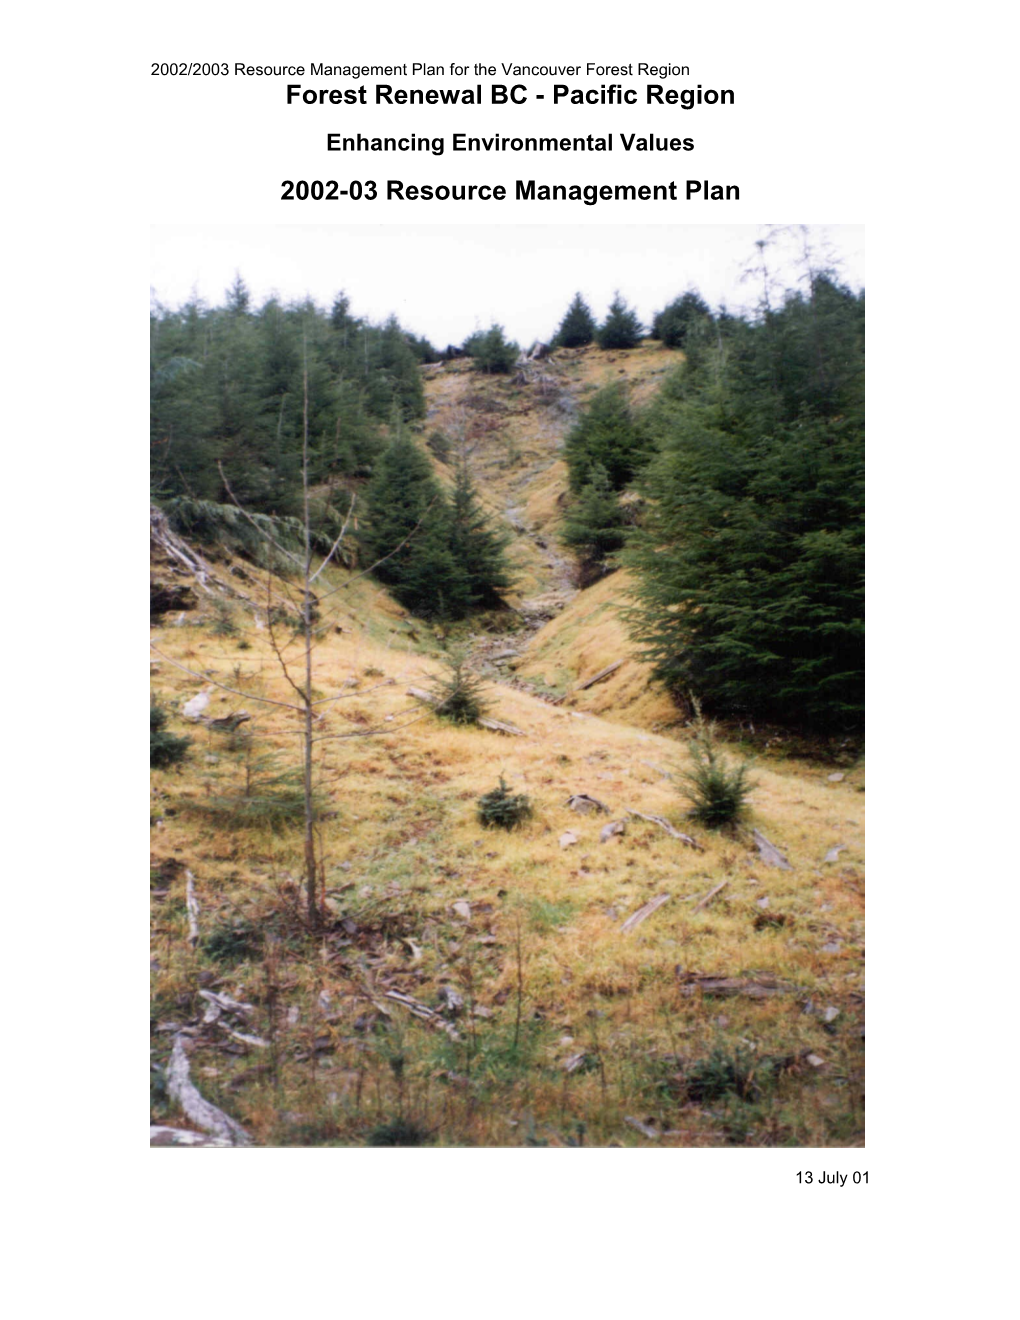 The Purpose of the Enhancing Environmental Values Resource Management Plan Is to Ensure